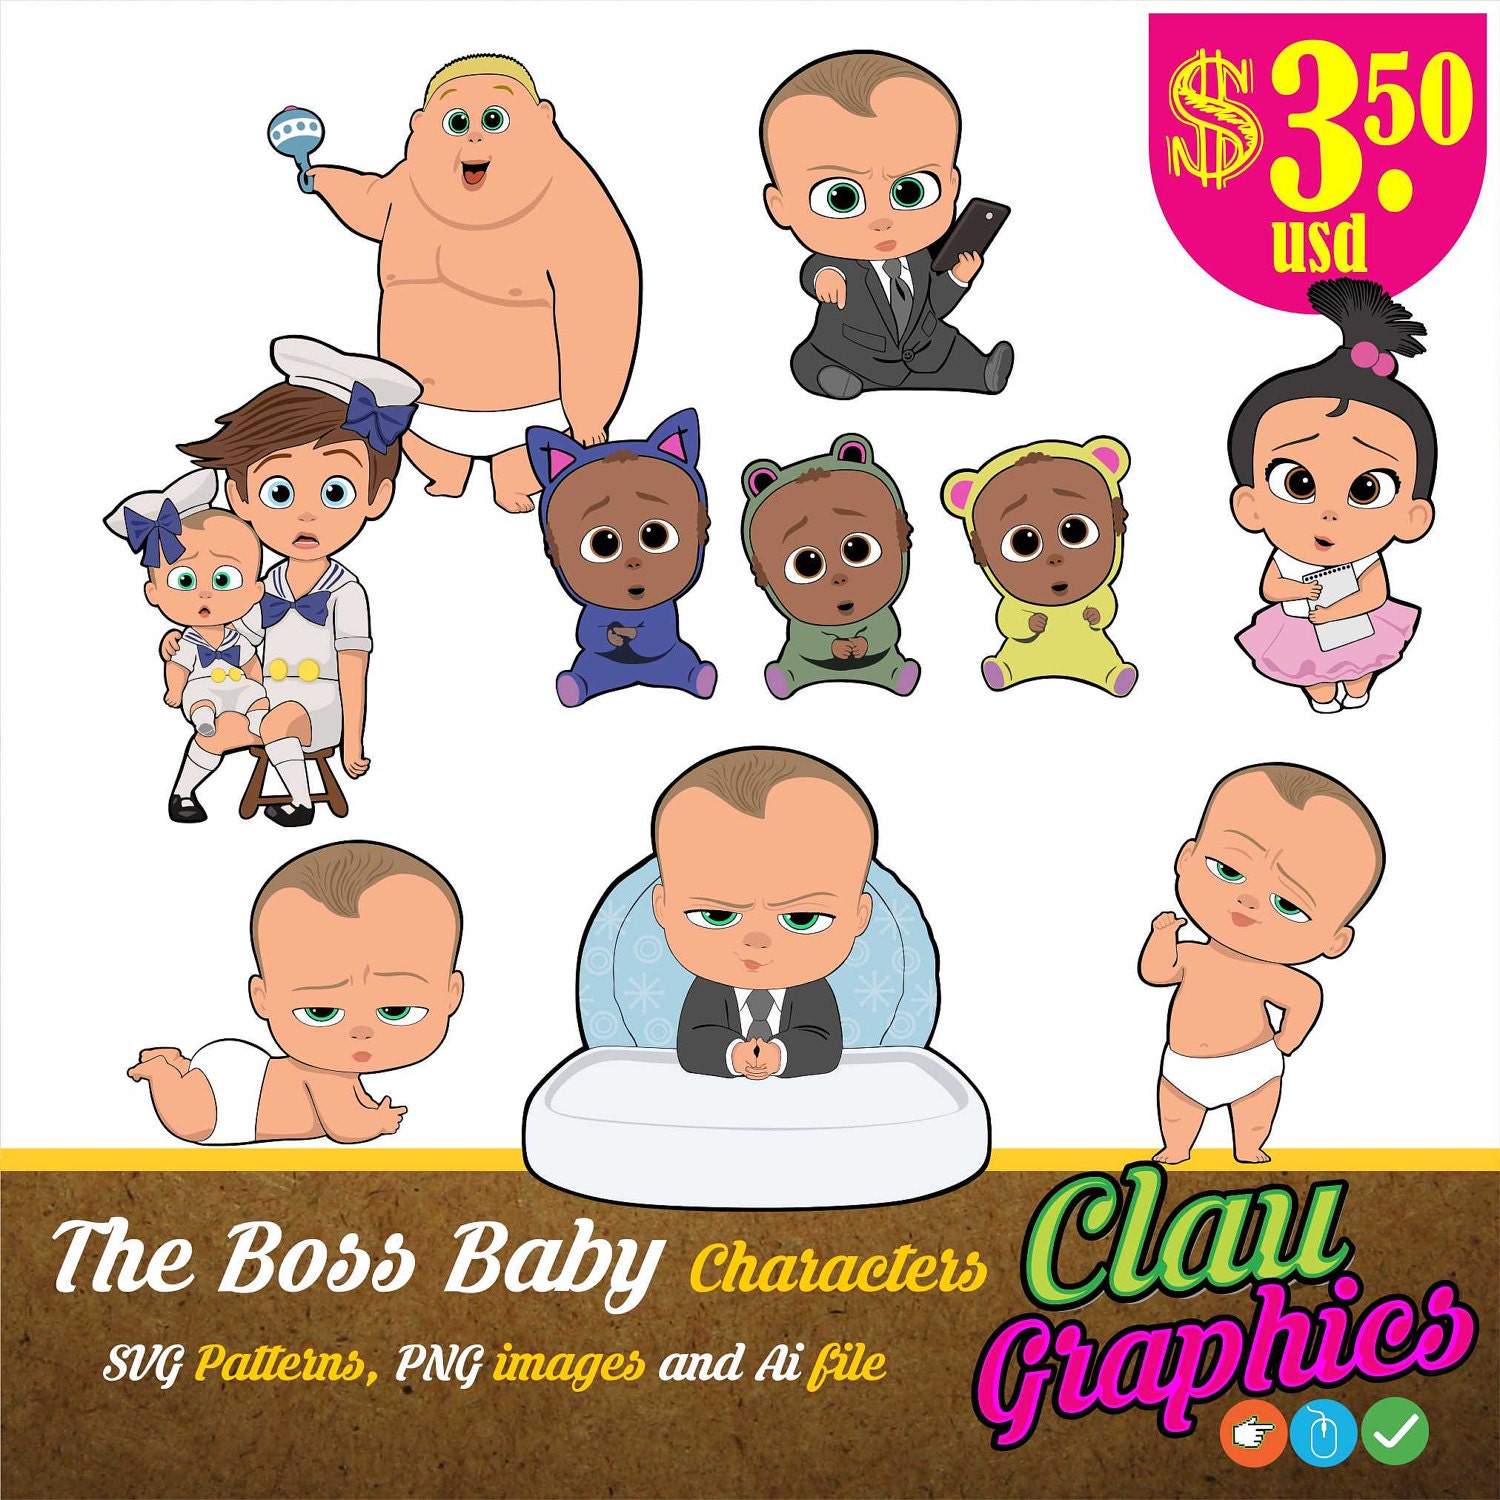 Download The Boss Baby Movie clipart, Digital Illustrations on ...